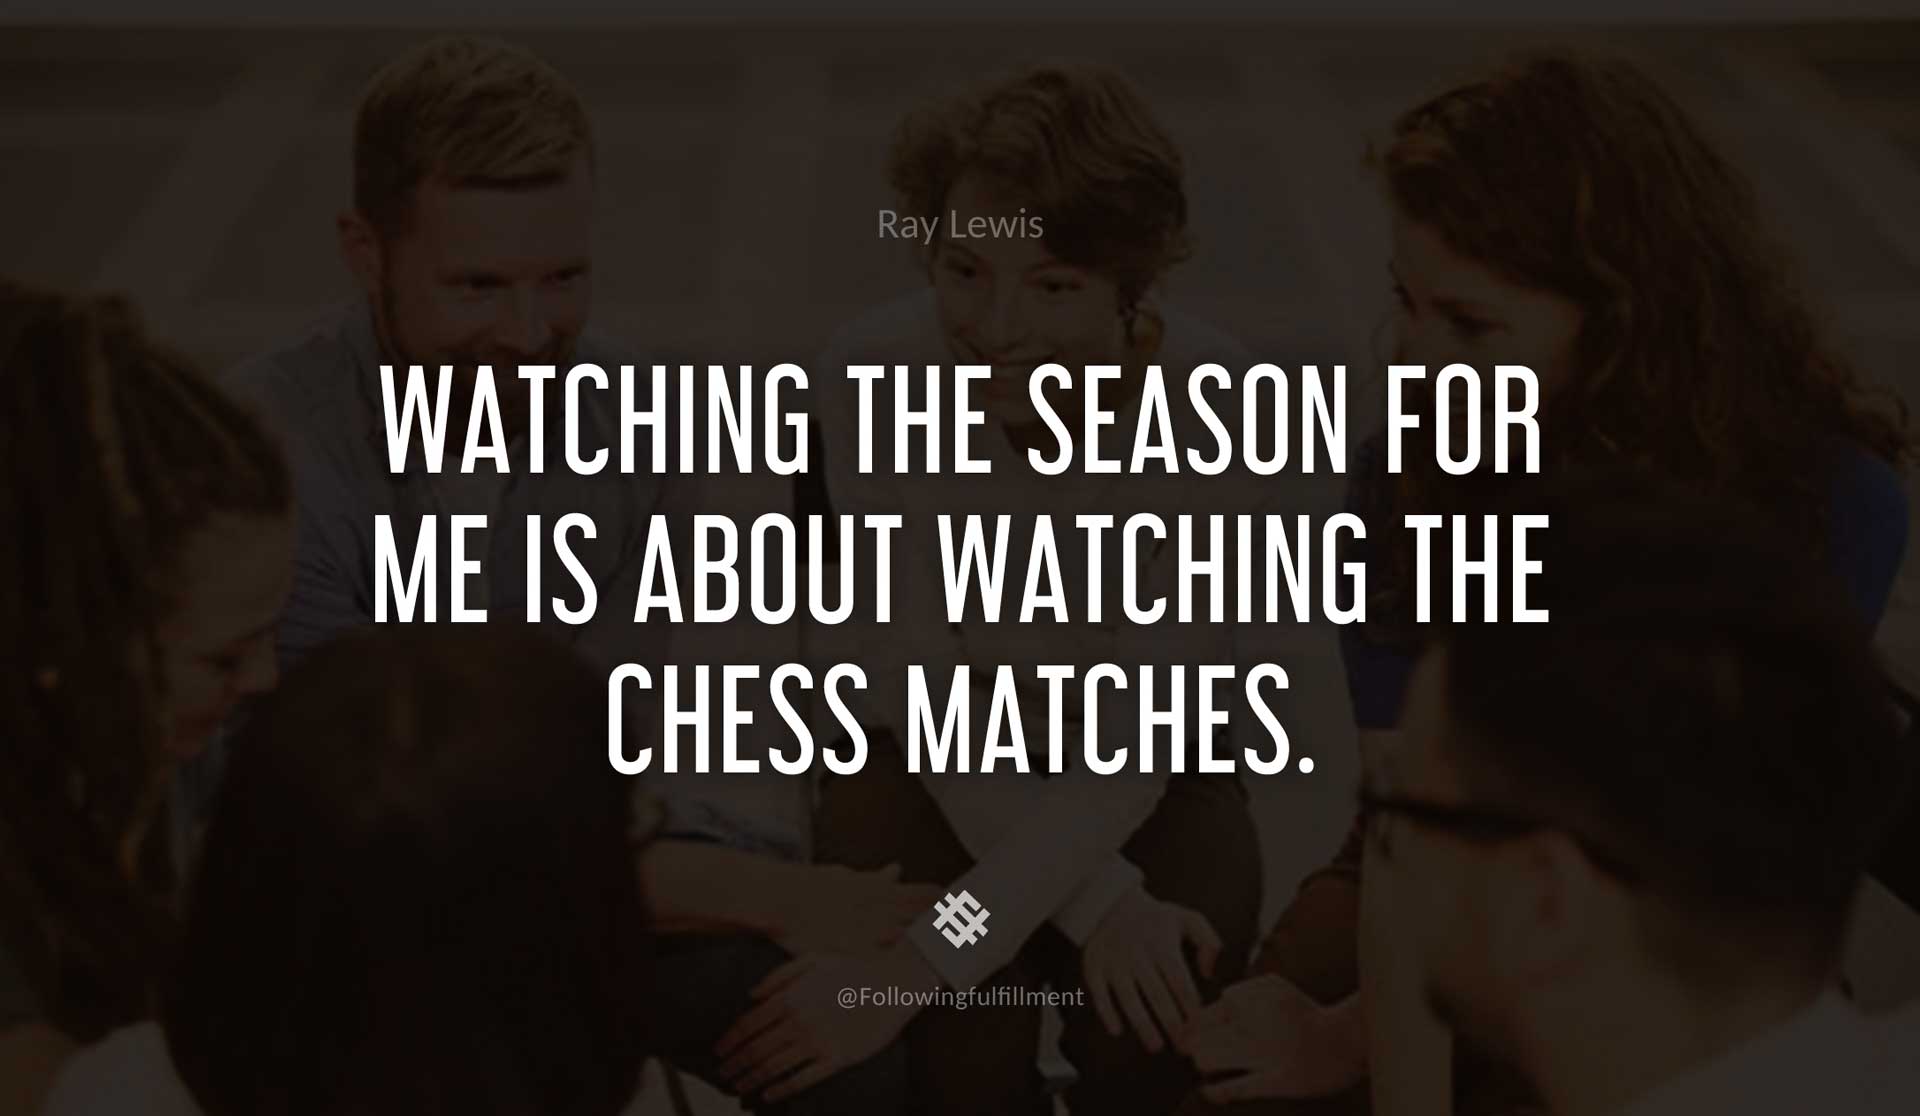 Watching-the-season-for-me-is-about-watching-the-chess-matches.-RAY-LEWIS-Quote.jpg